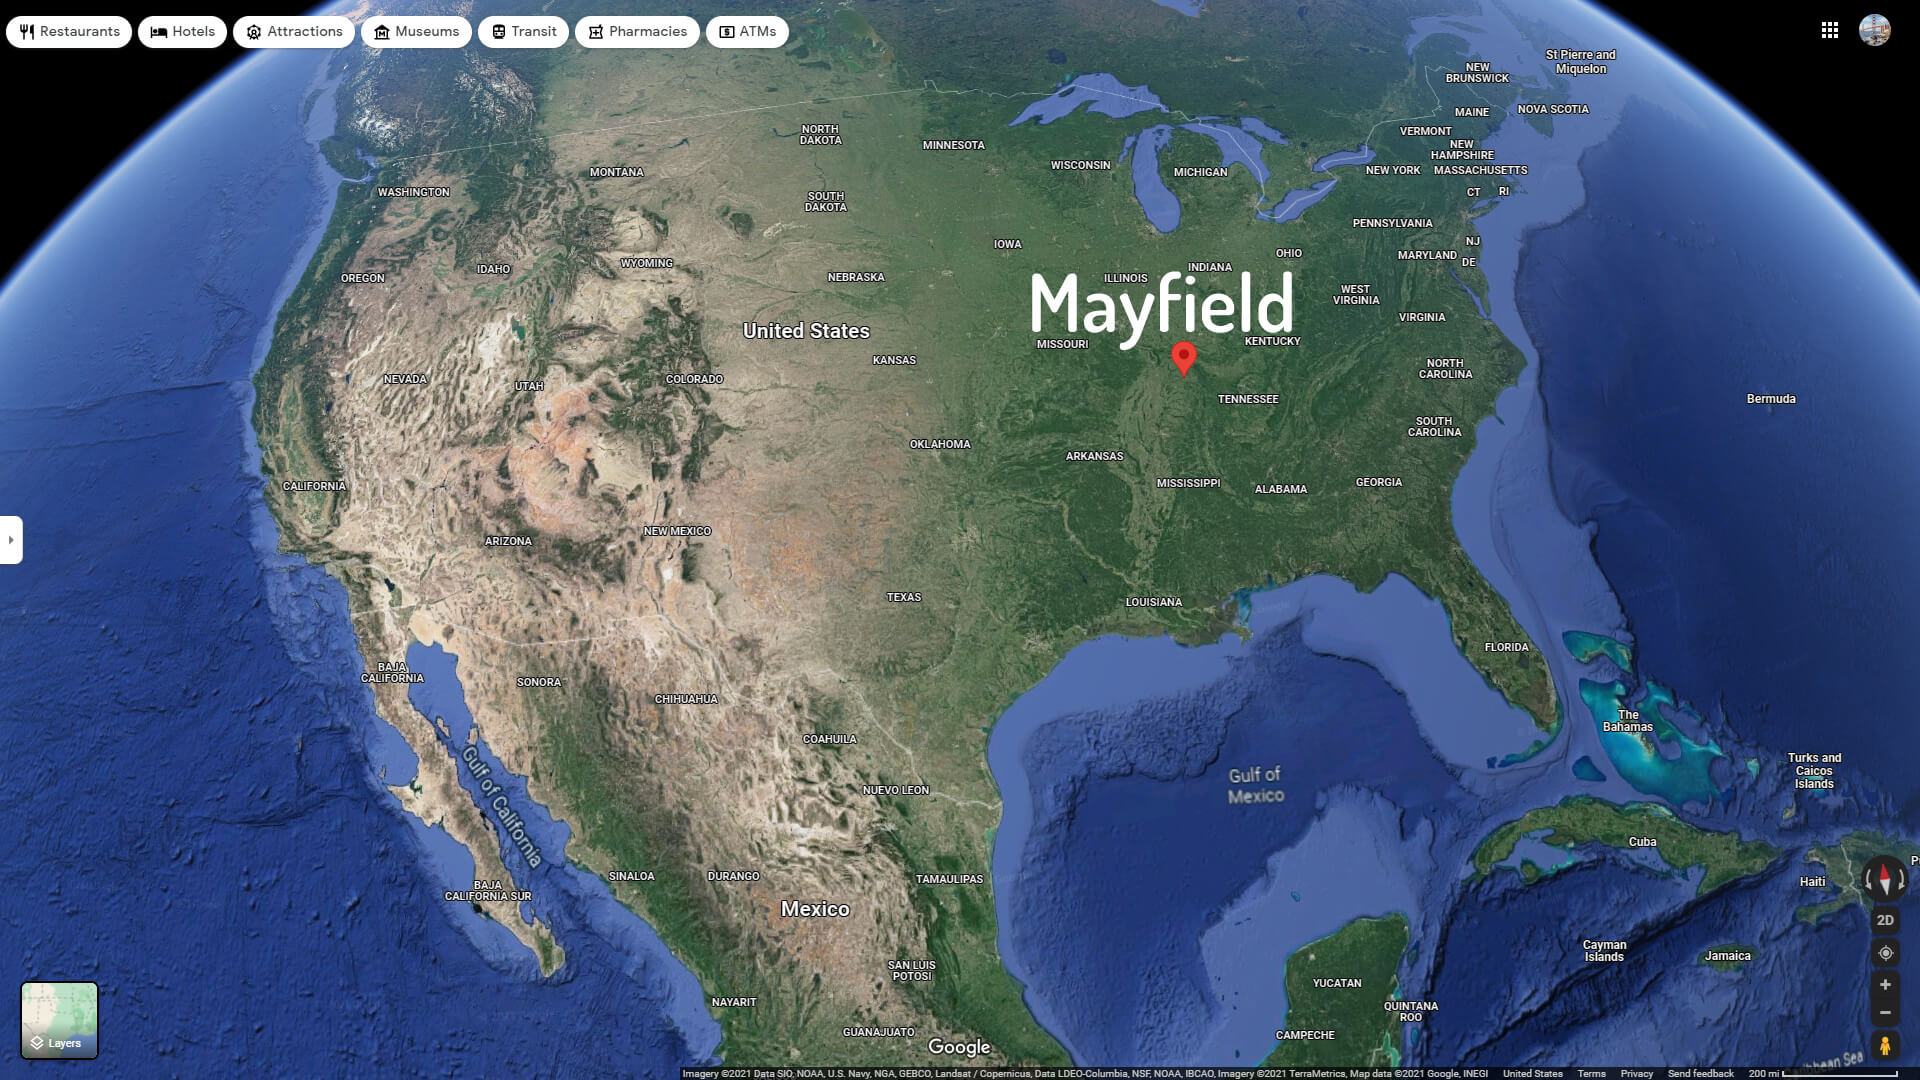 Where is Mayfield in the US